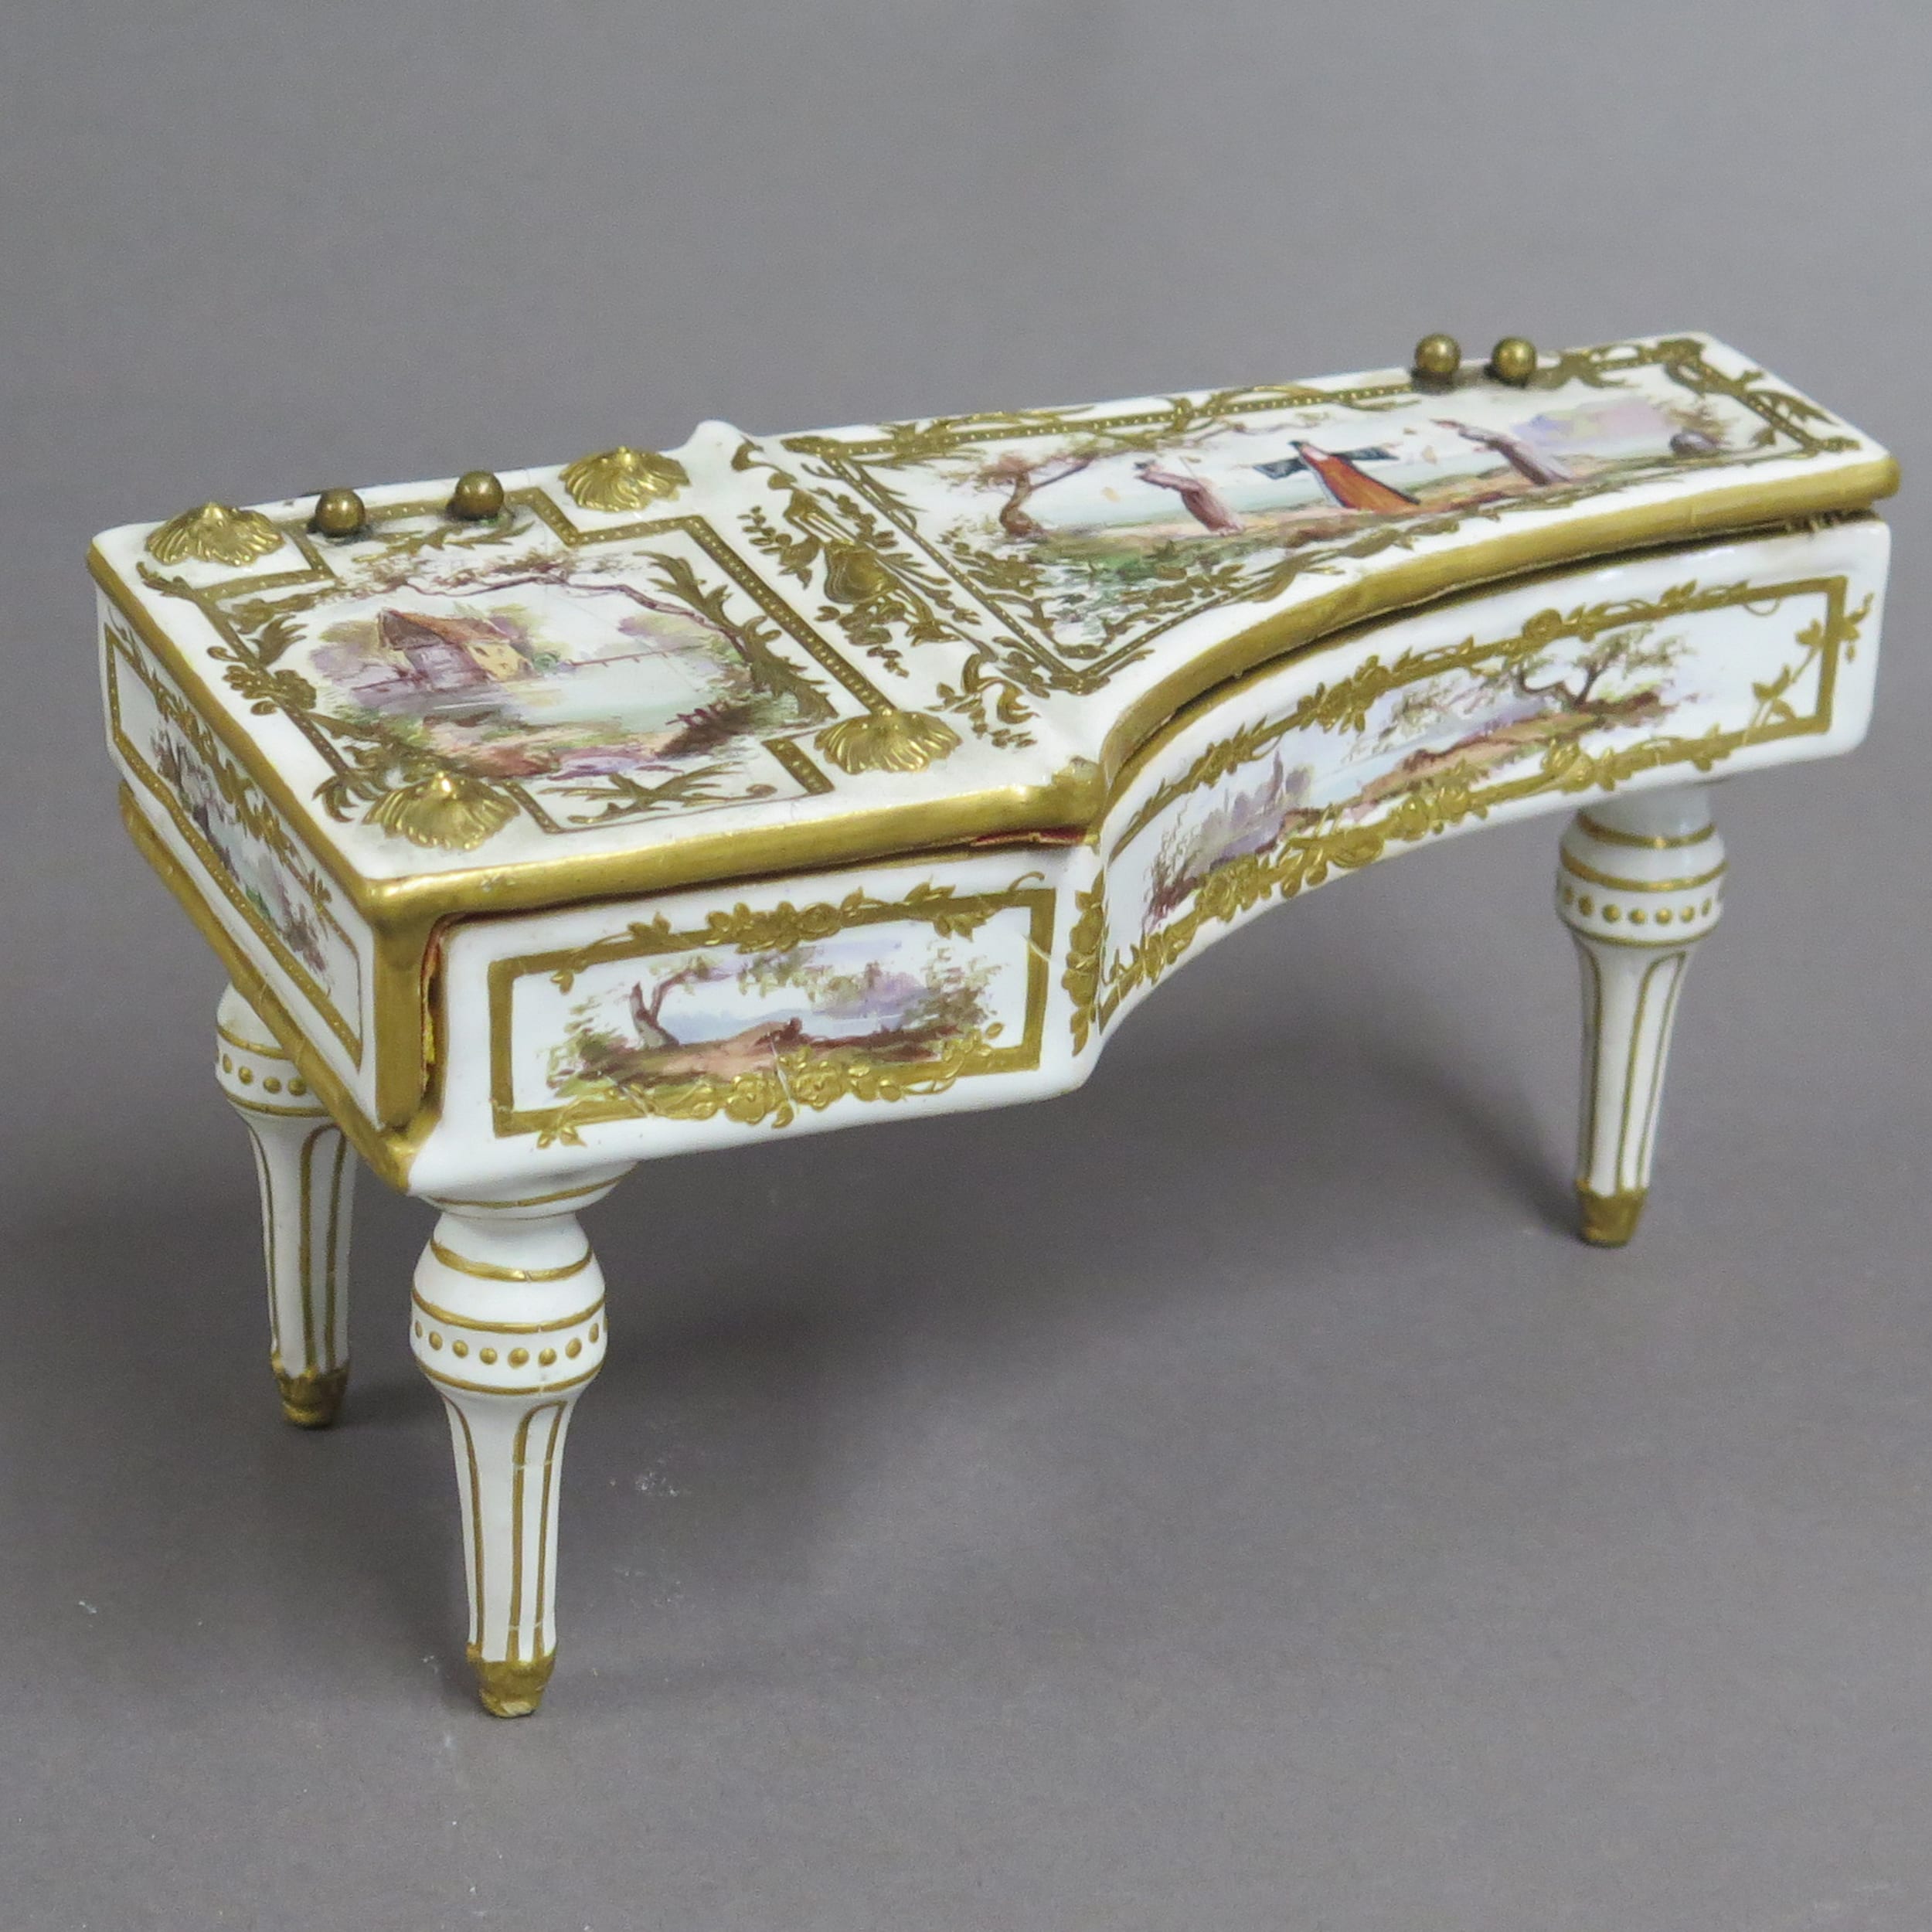 Lot 118: Early French Porcelain Piano Lidded Jewelry Box